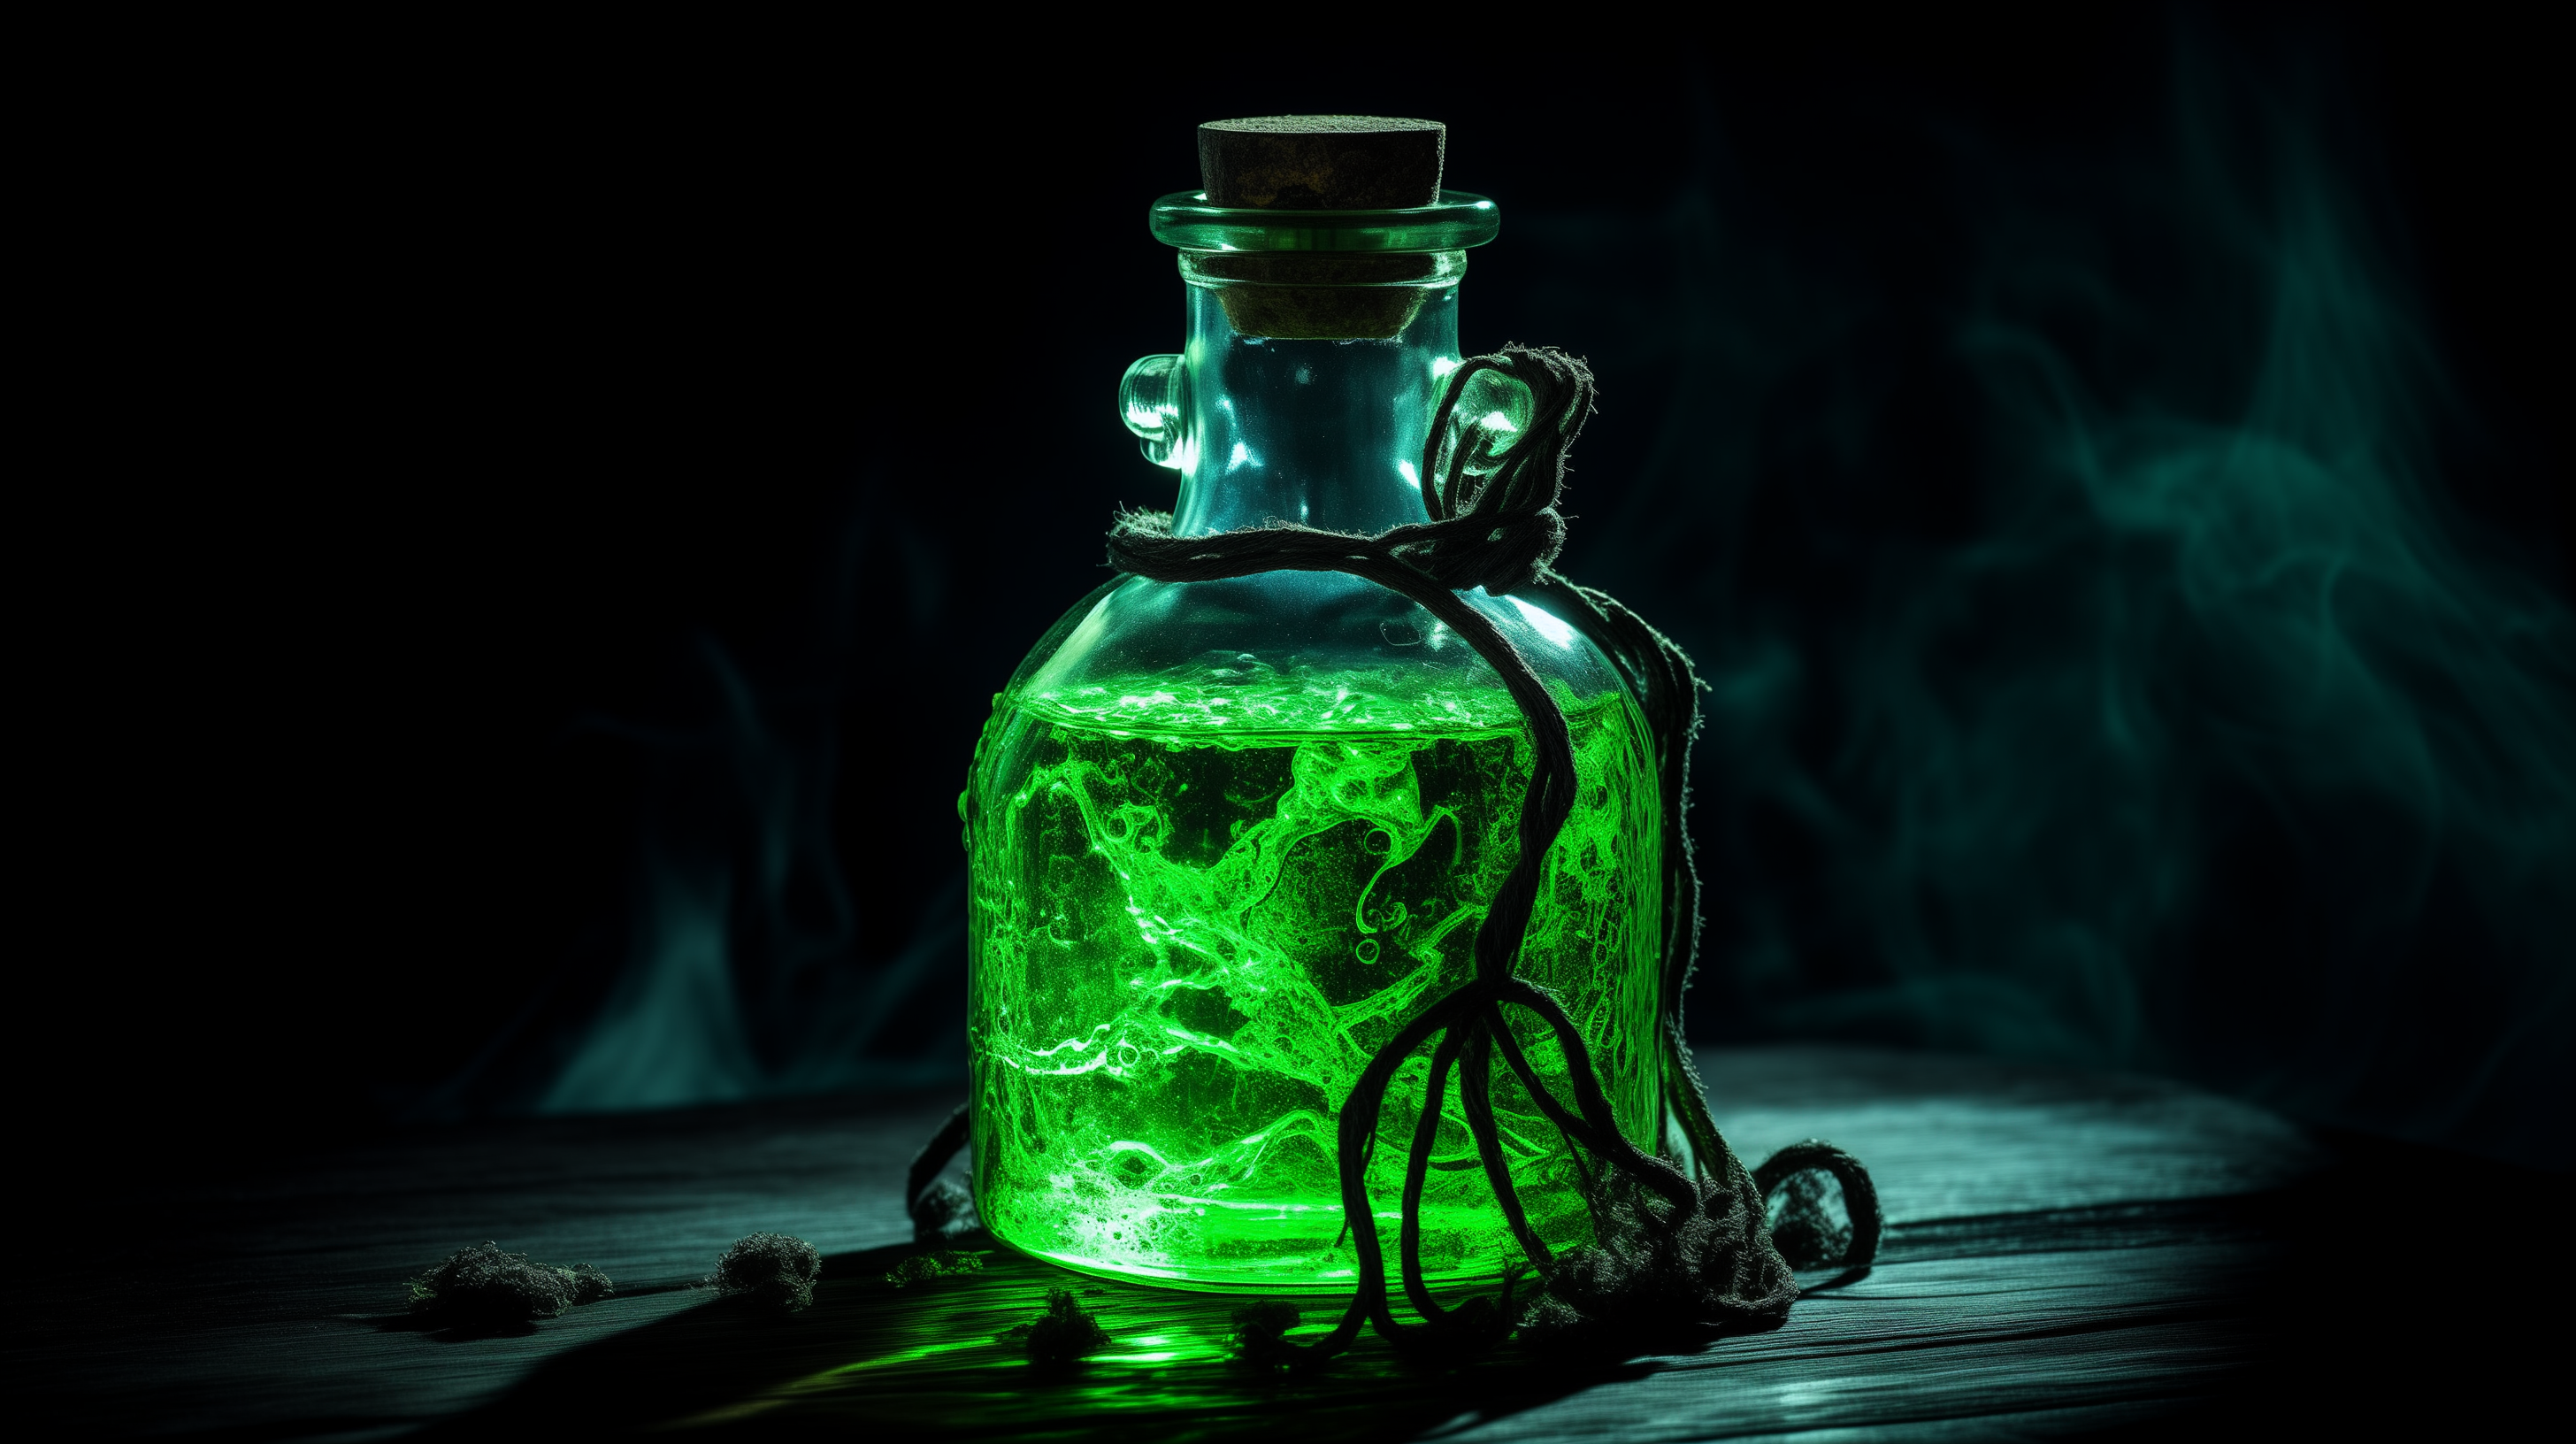 HD desktop wallpaper featuring a glowing green toxic potion in a man-made bottle, surrounded by mysterious smoke.